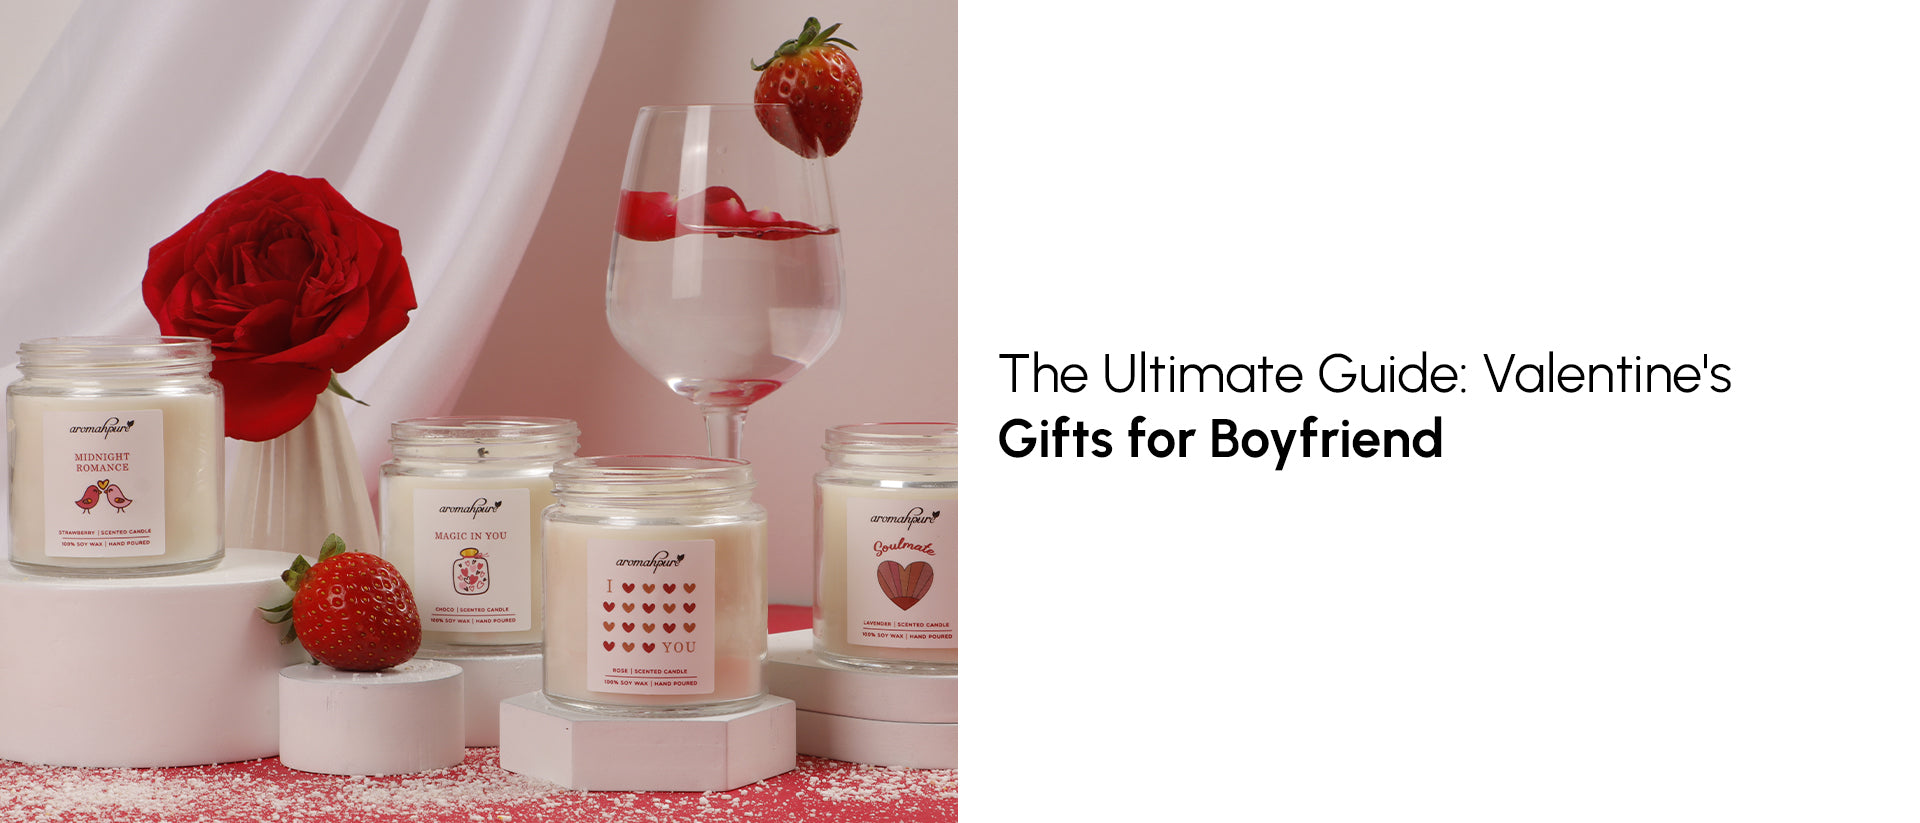 The Ultimate Guide: Valentine's Gifts for Boyfriend